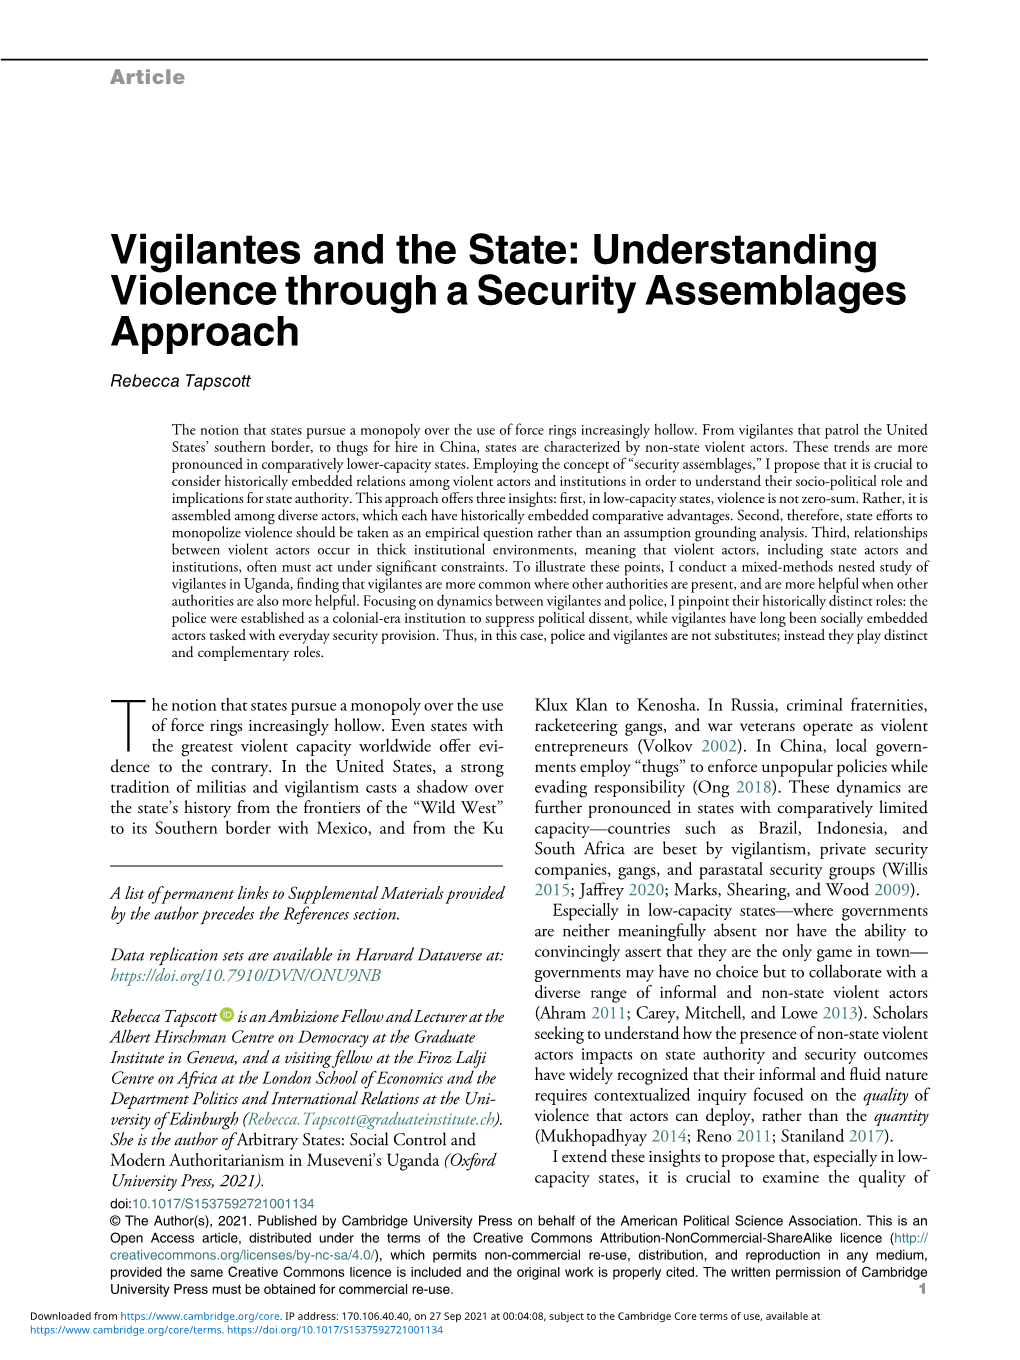 Vigilantes and the State: Understanding Violence Through a Security Assemblages Approach Rebecca Tapscott